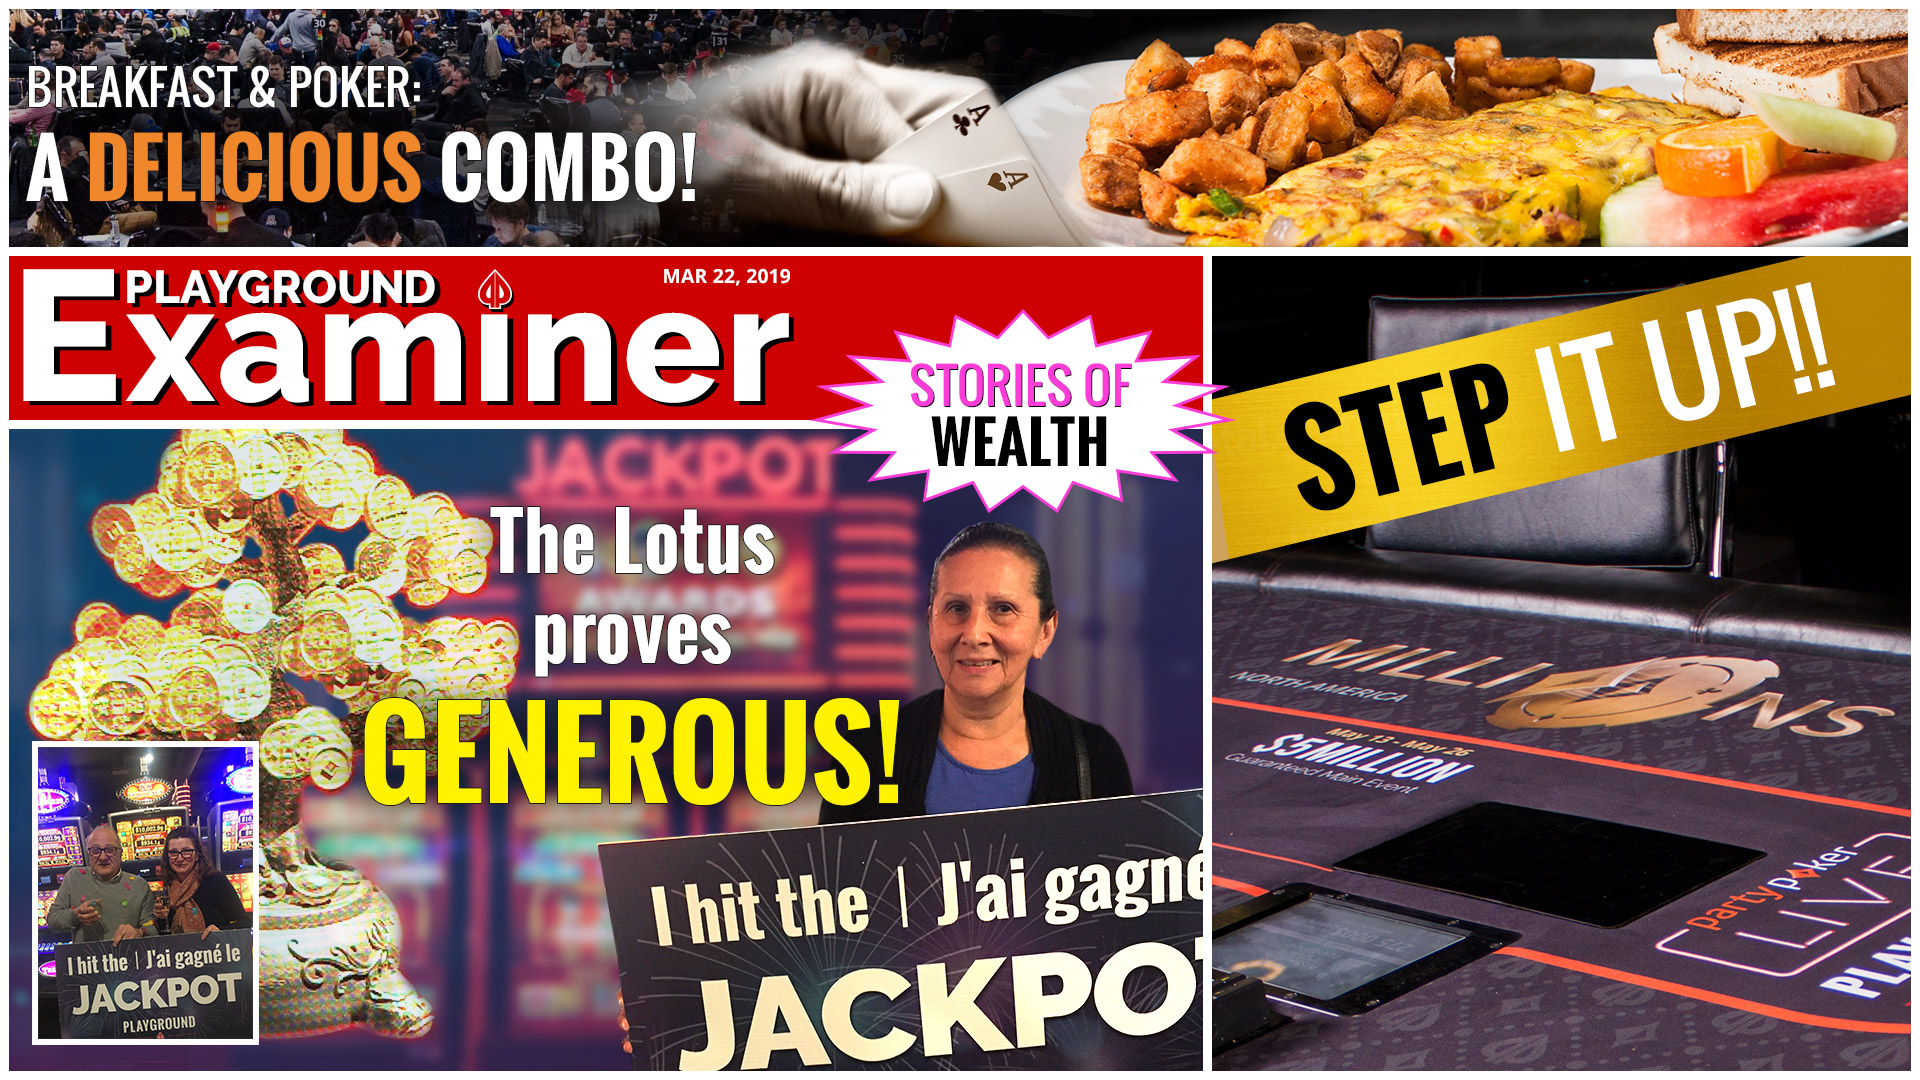 Jackpots, STEPS, and more!